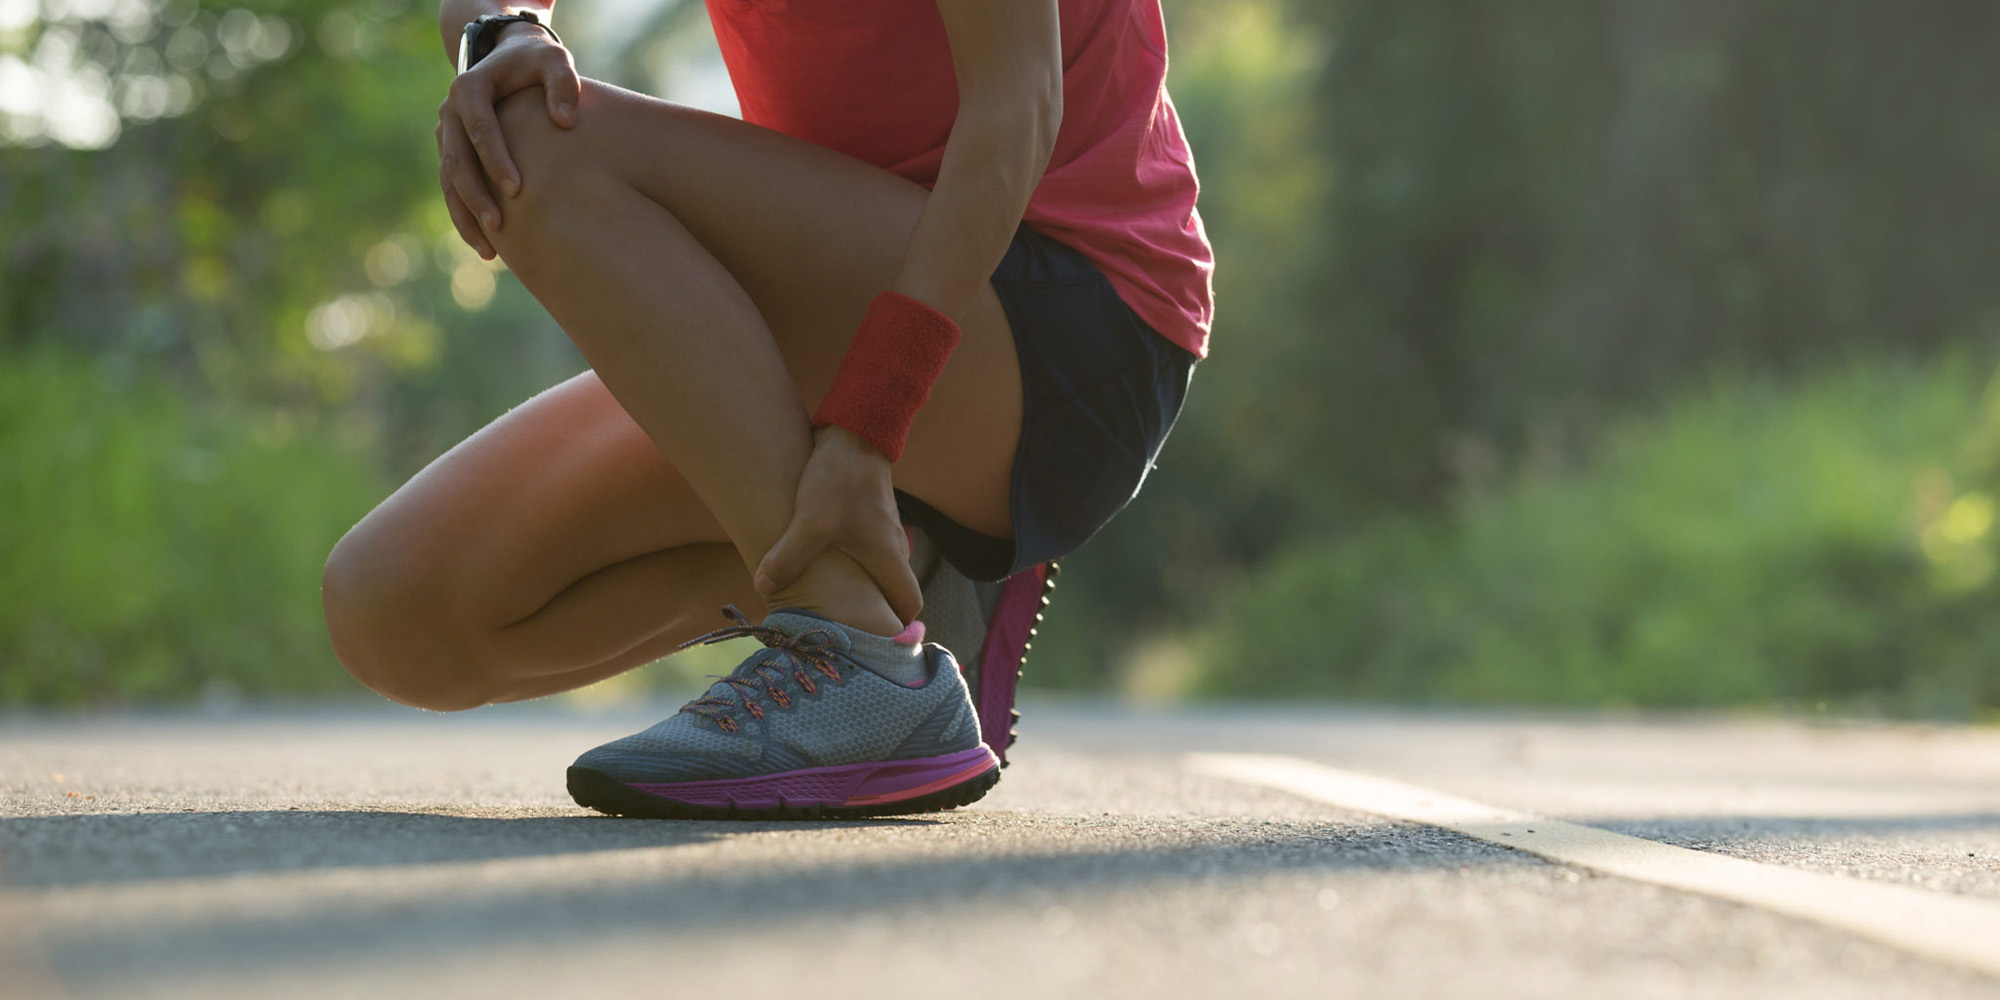 How to Prevent Ankle Sprains: 3 Essential Tips for Runners, by Abigail  Lock